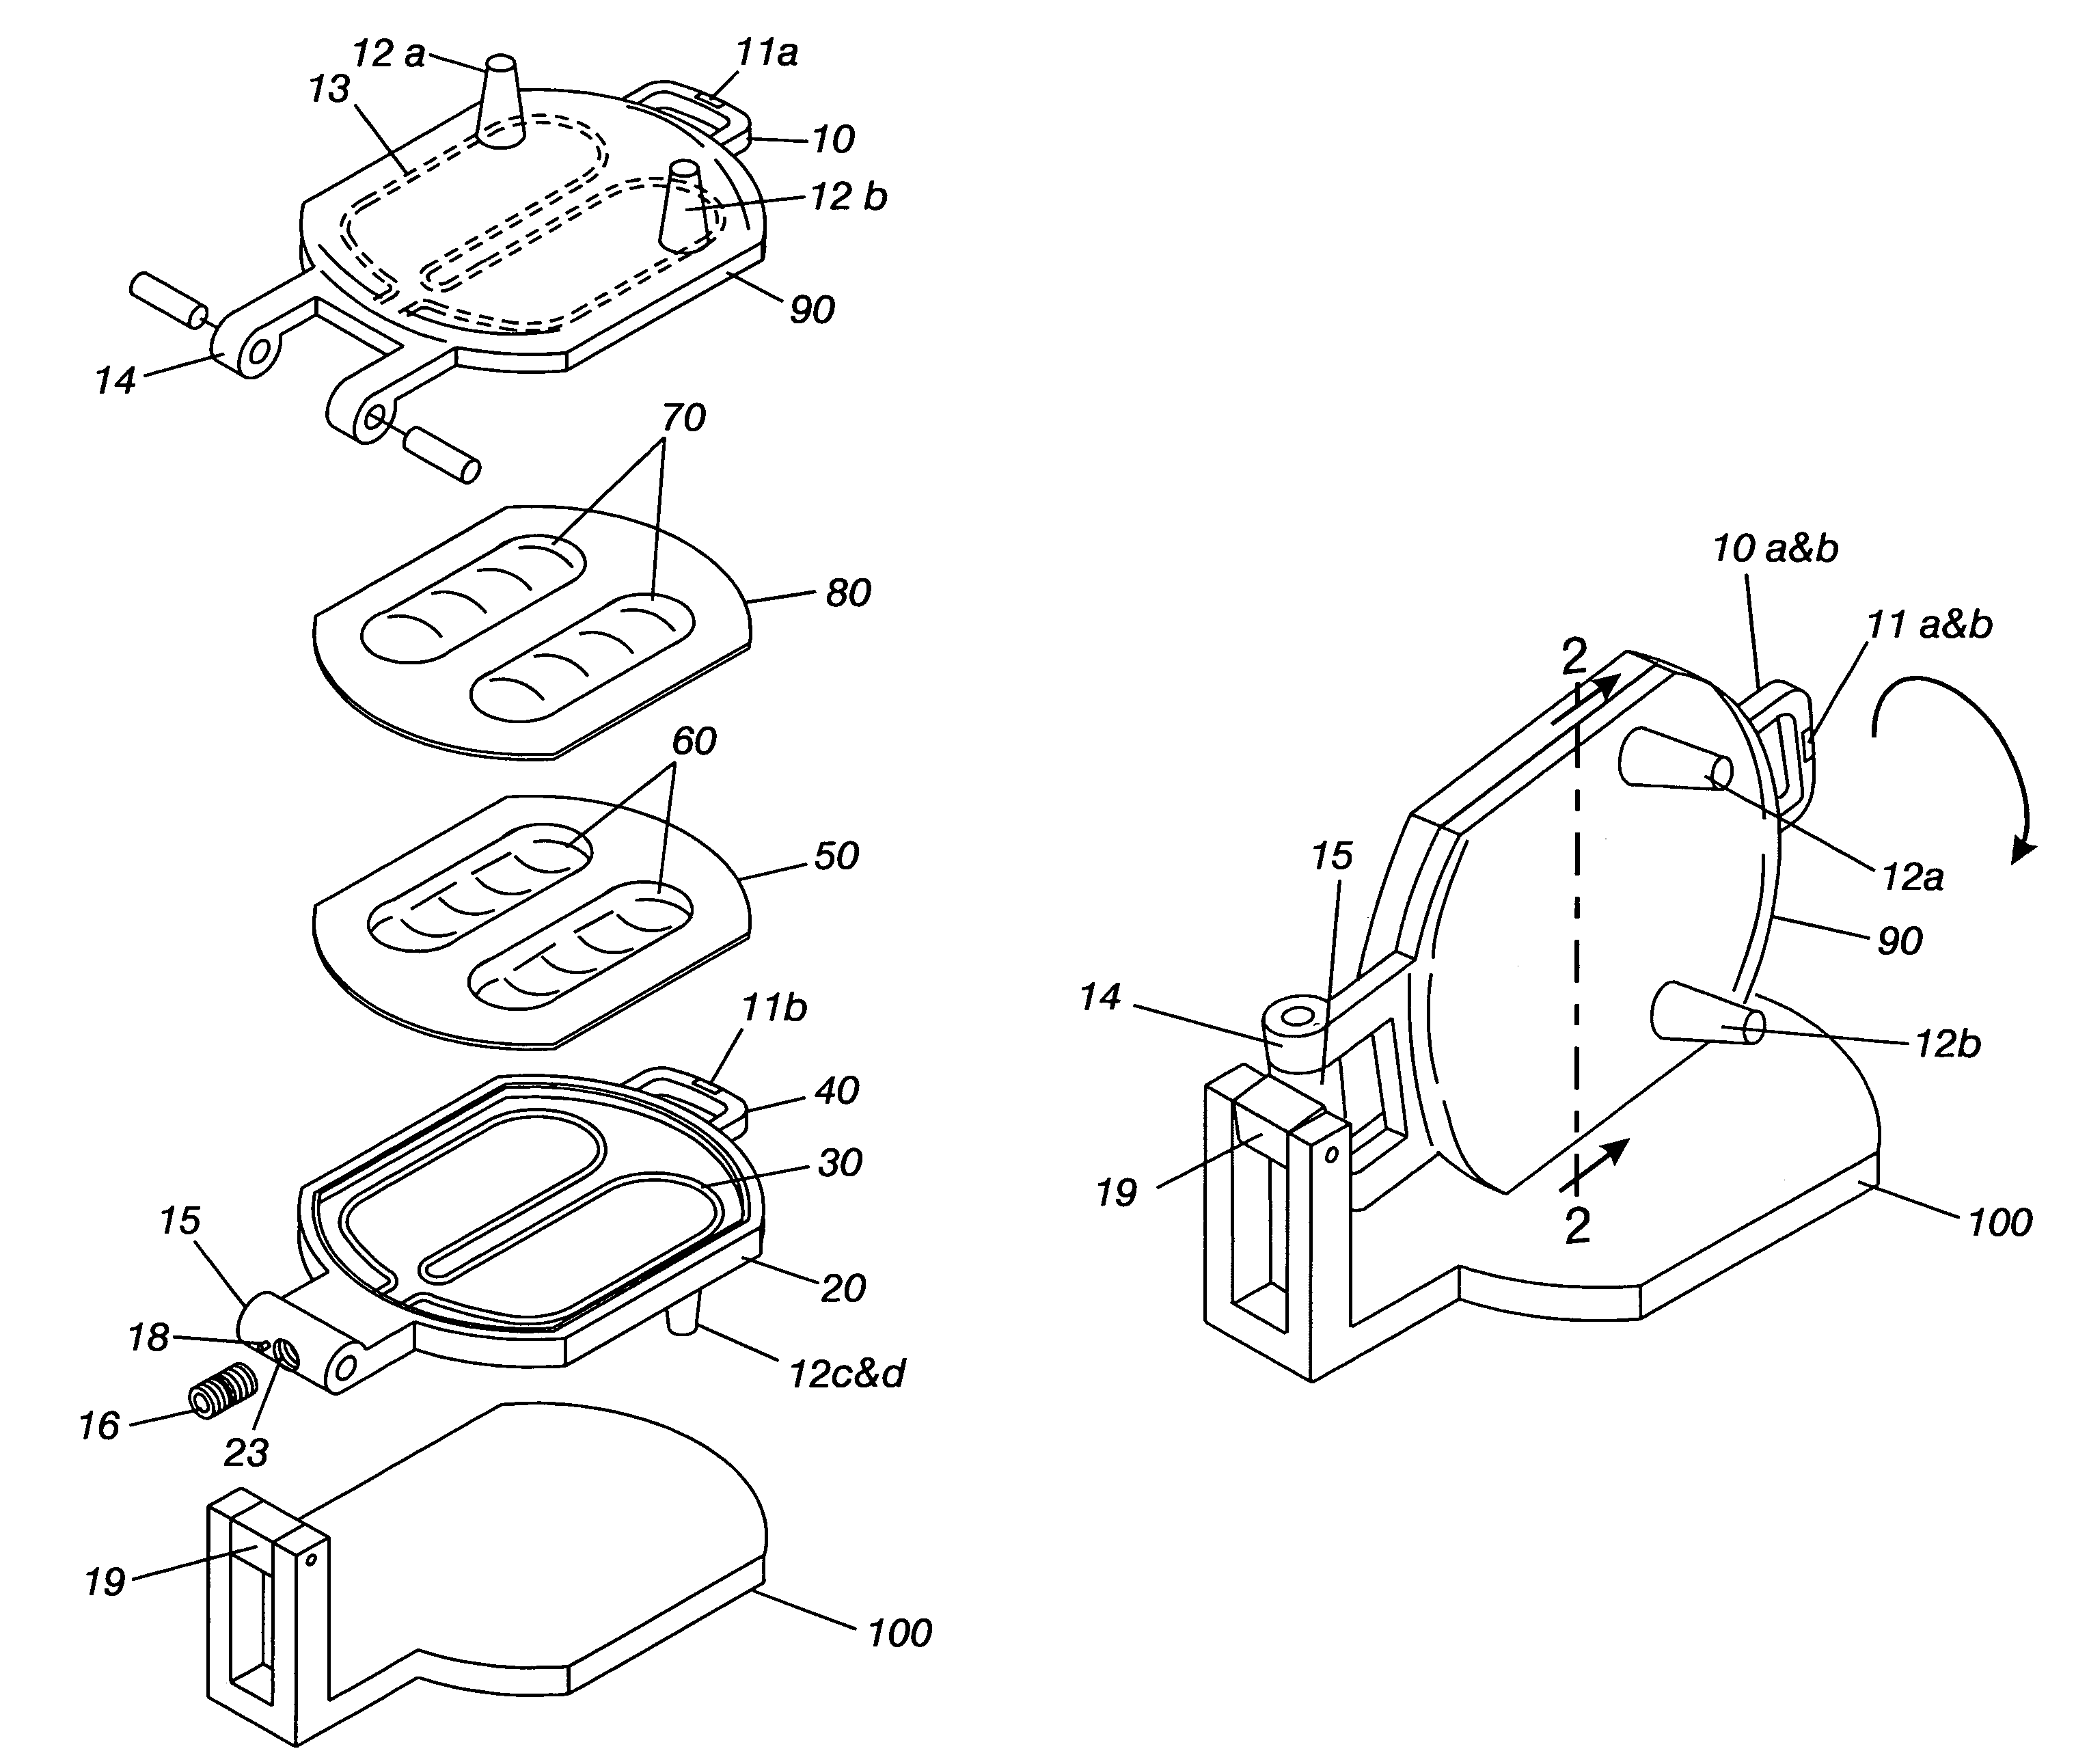 Method and apparatus to cook and form an omelet in one step